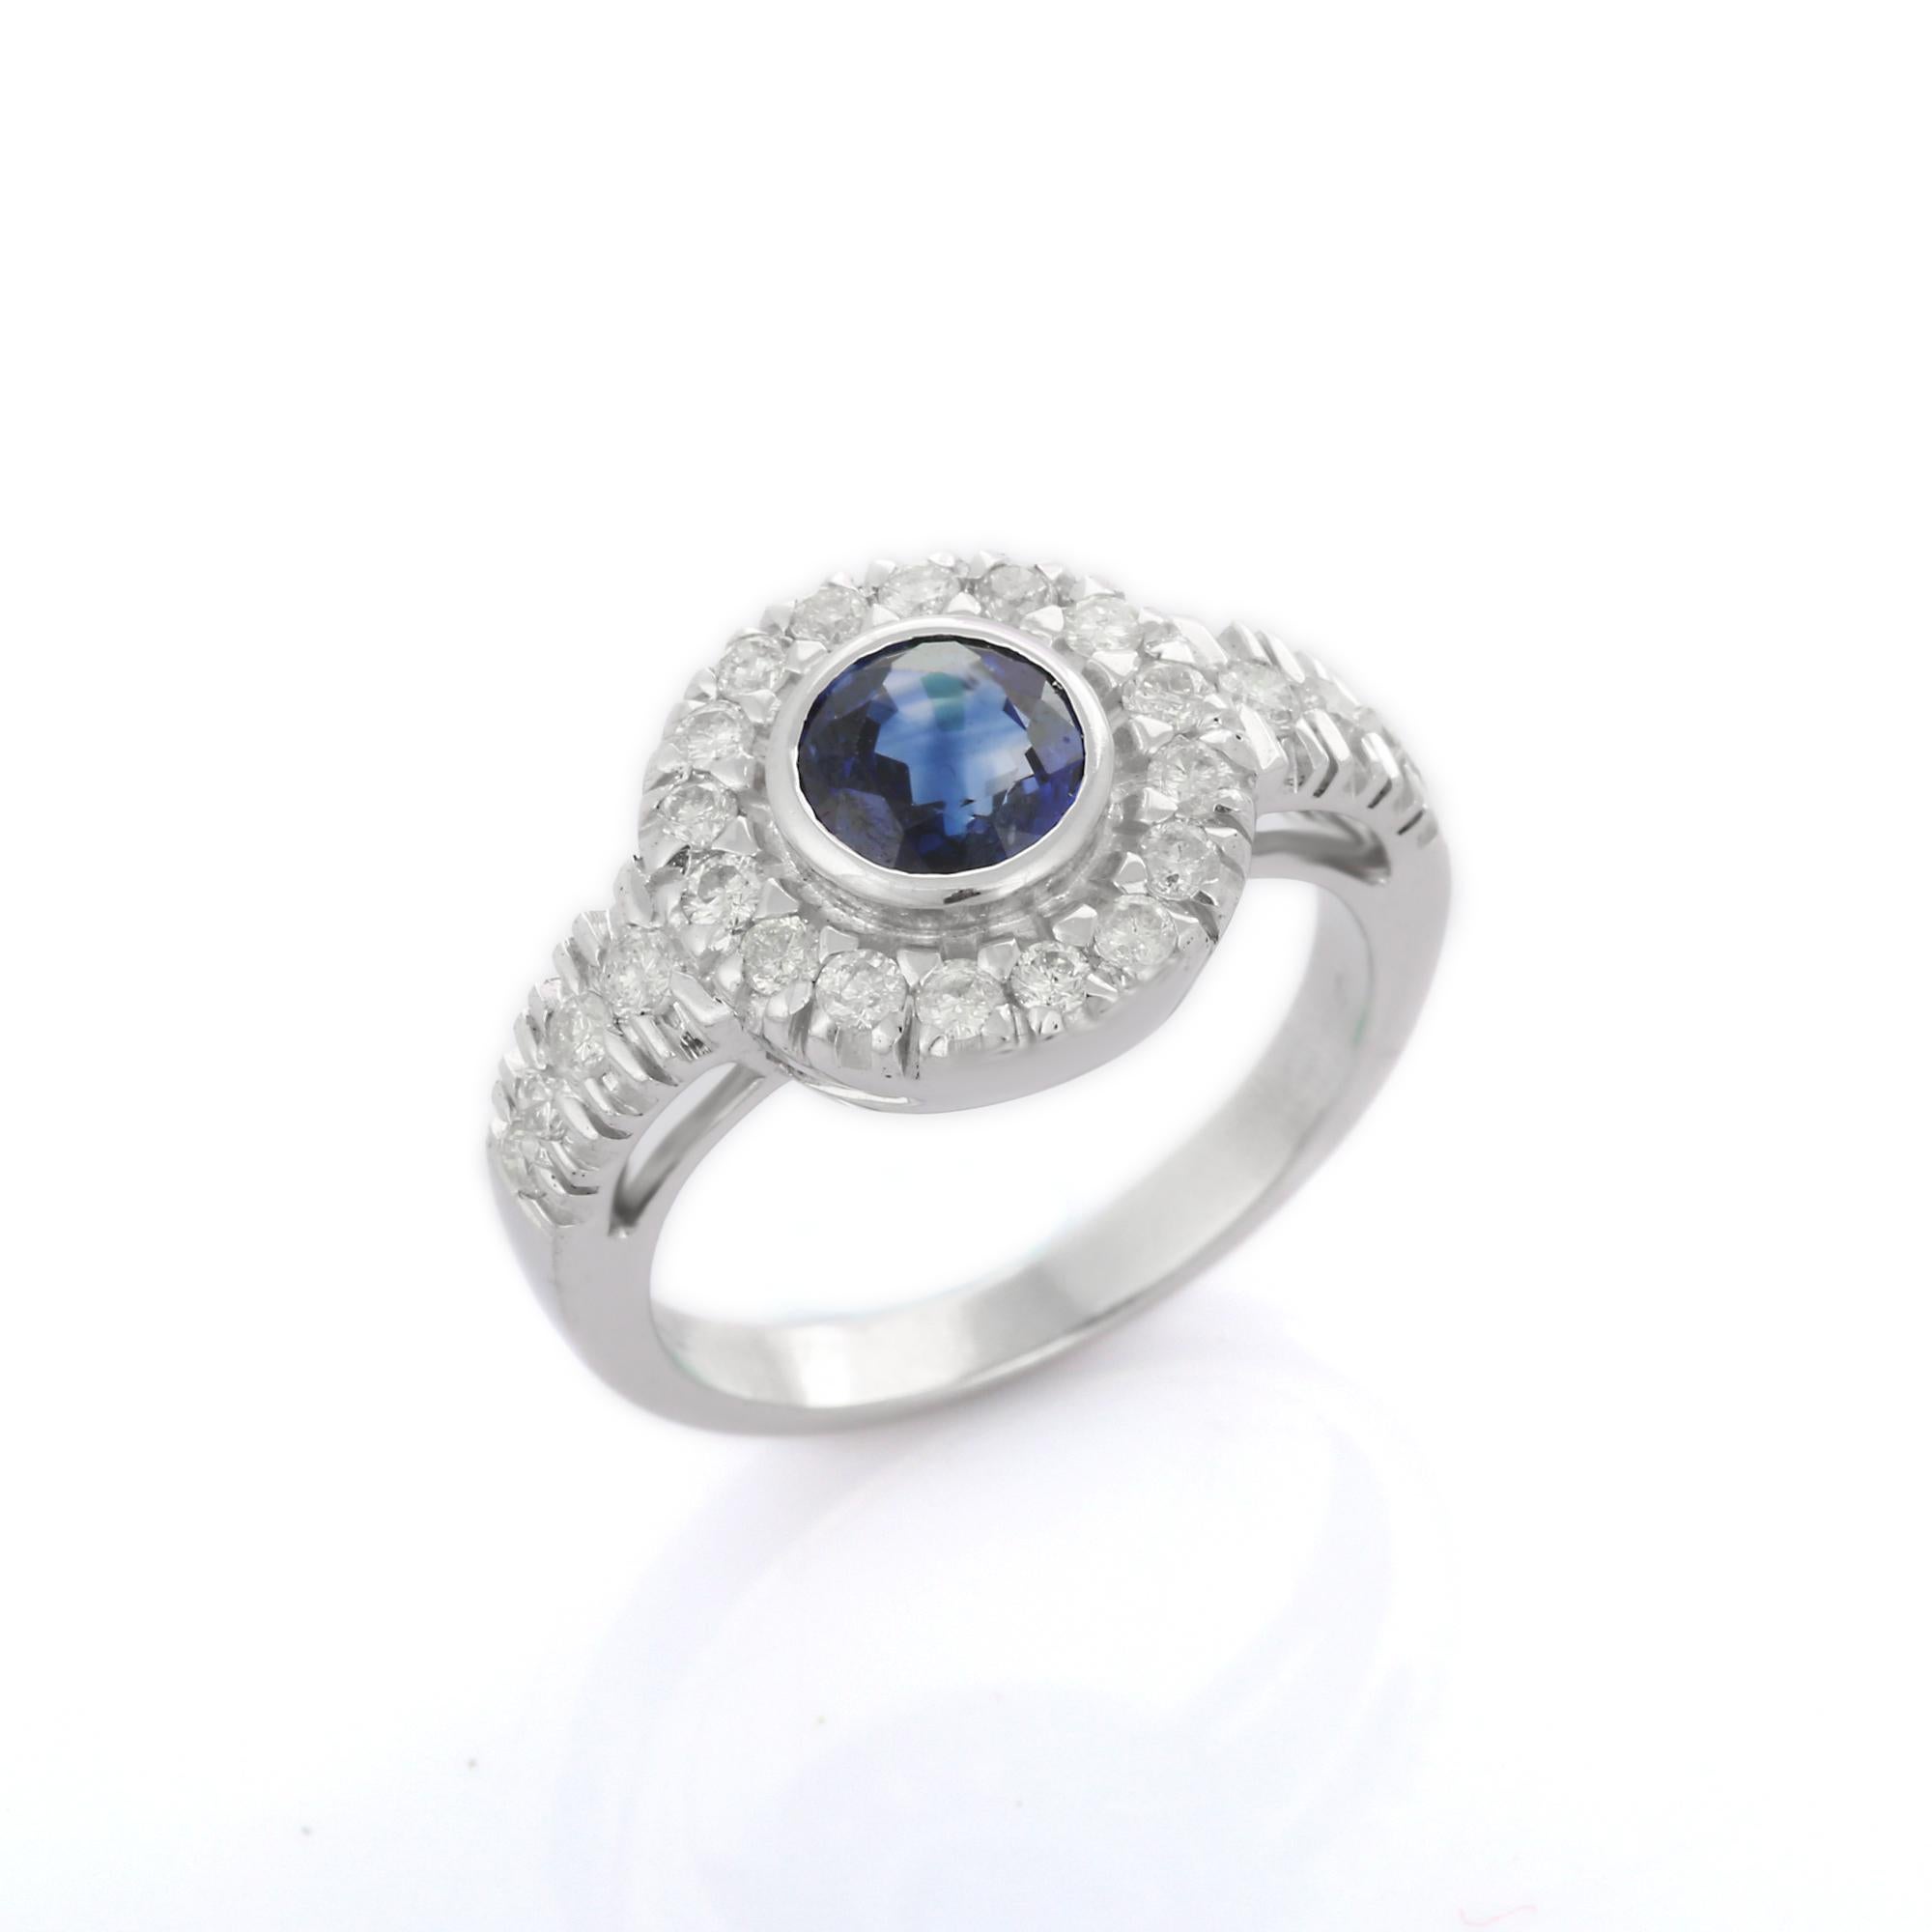 For Sale:  Brilliant 1.15 Ct Round Sapphire with Diamonds Engagement Ring in 18K White Gold 5